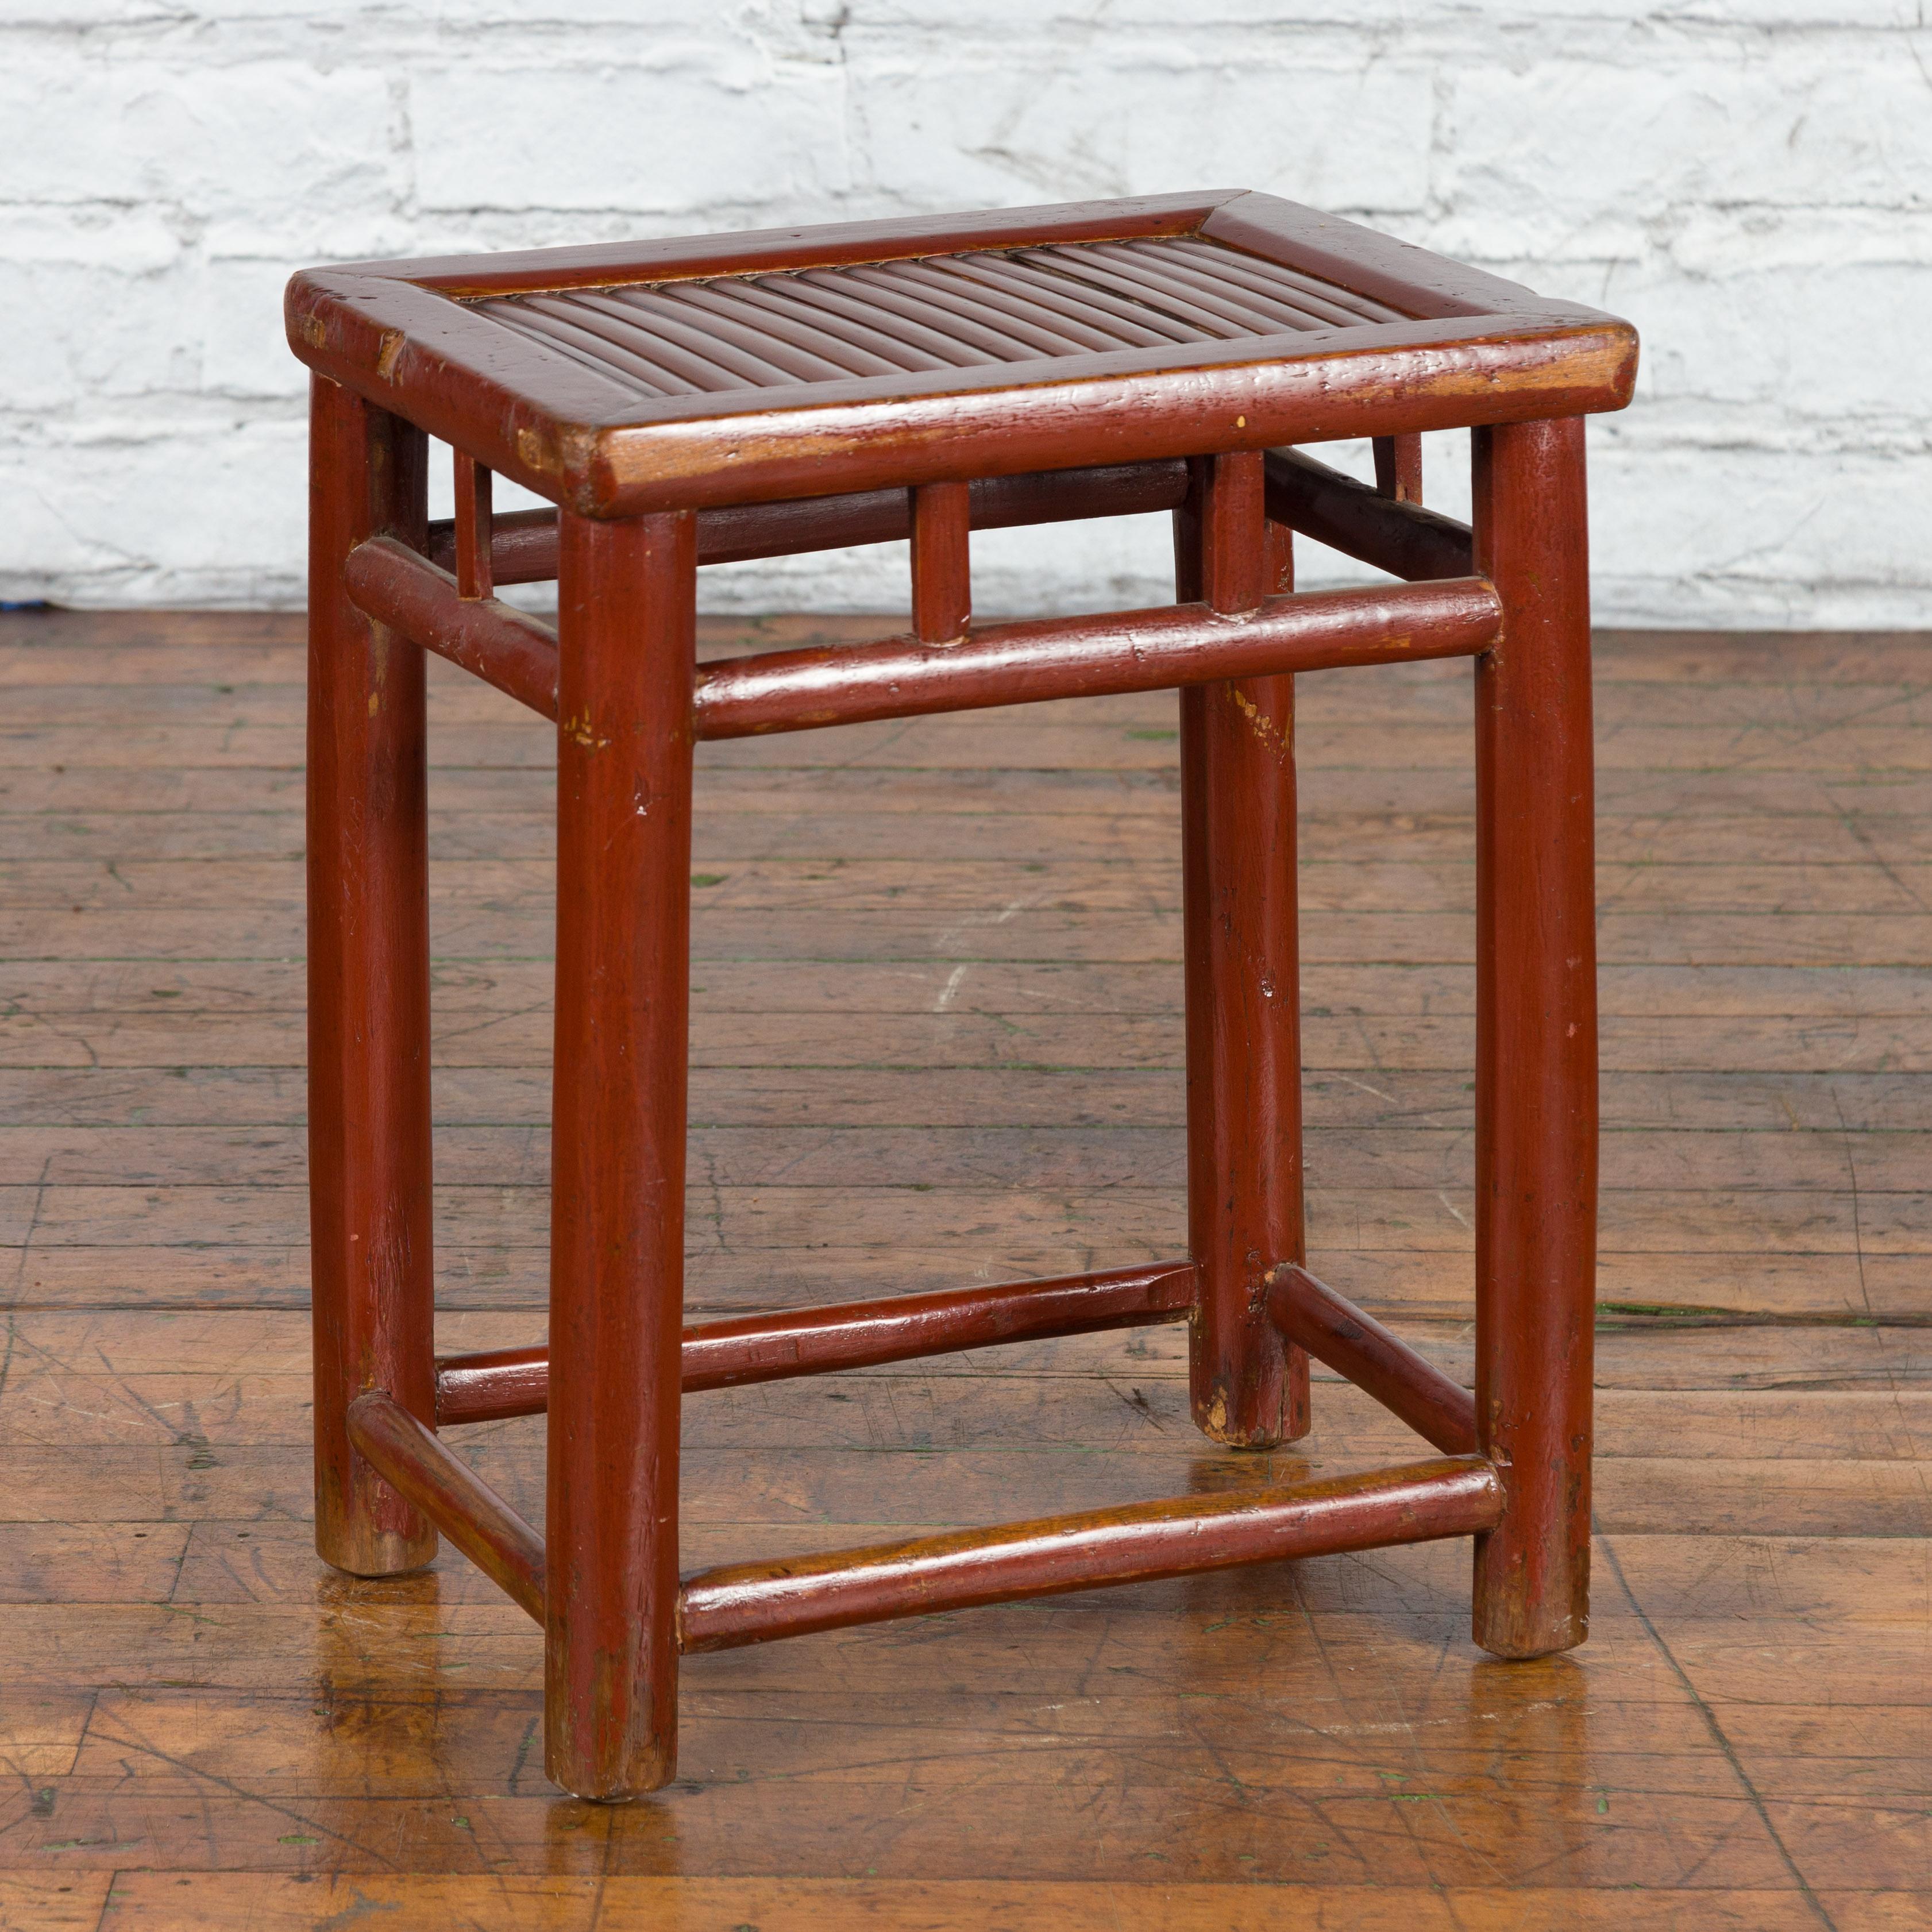 Chinese Rustic Early 20th Century Reddish Brown Lacquered Stool with Bamboo Seat In Good Condition For Sale In Yonkers, NY